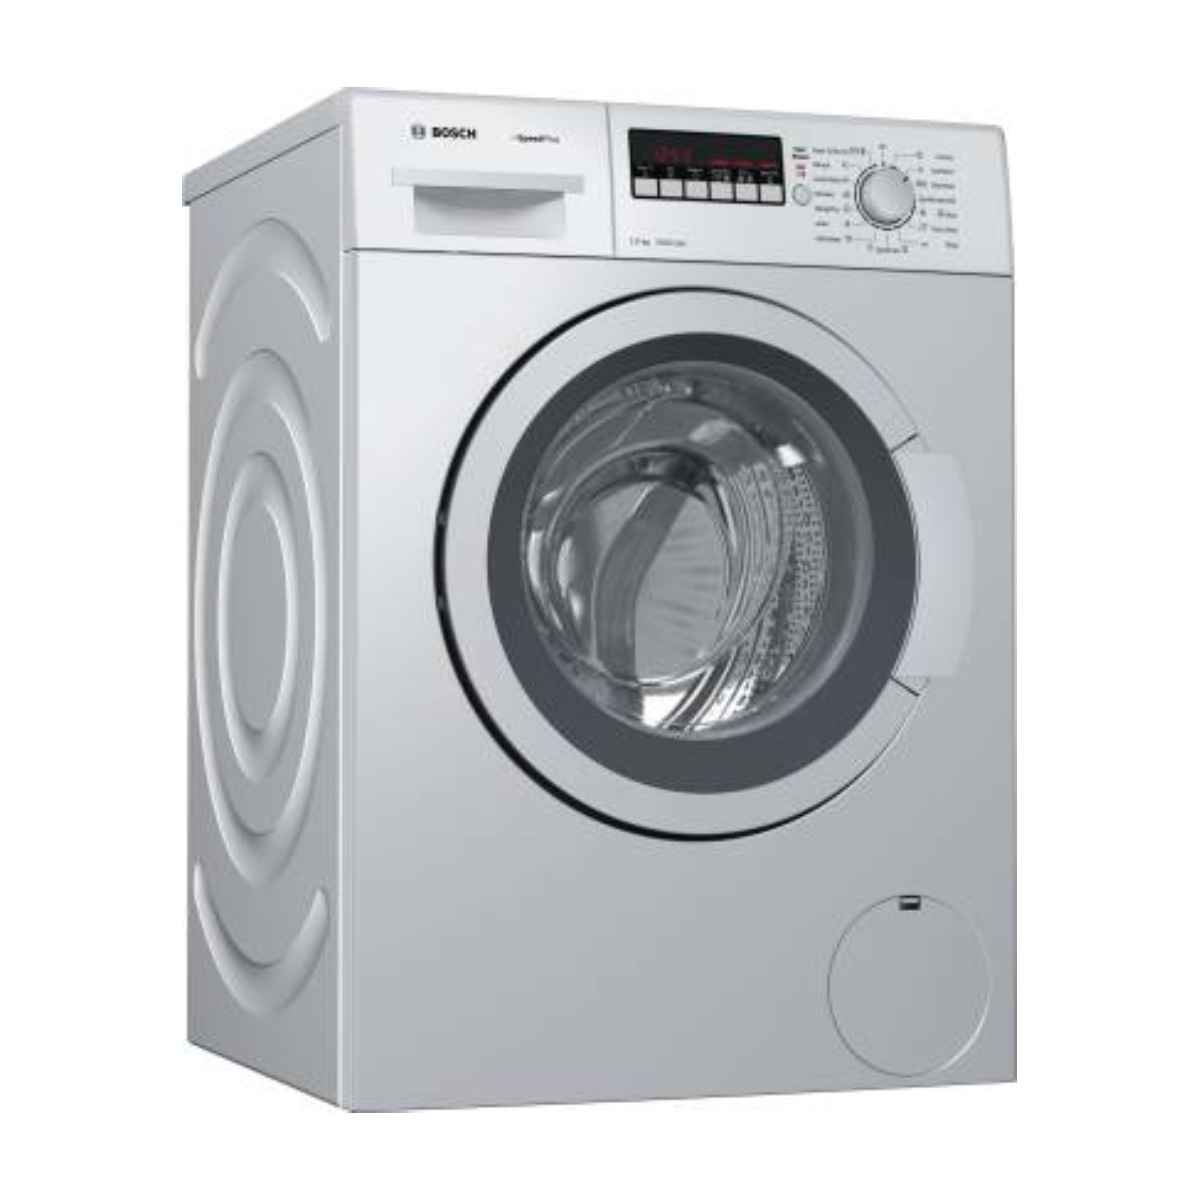 Bosch 7 kg Fully Automatic Front Load Washing Machine (WAK24169IN, Silver)